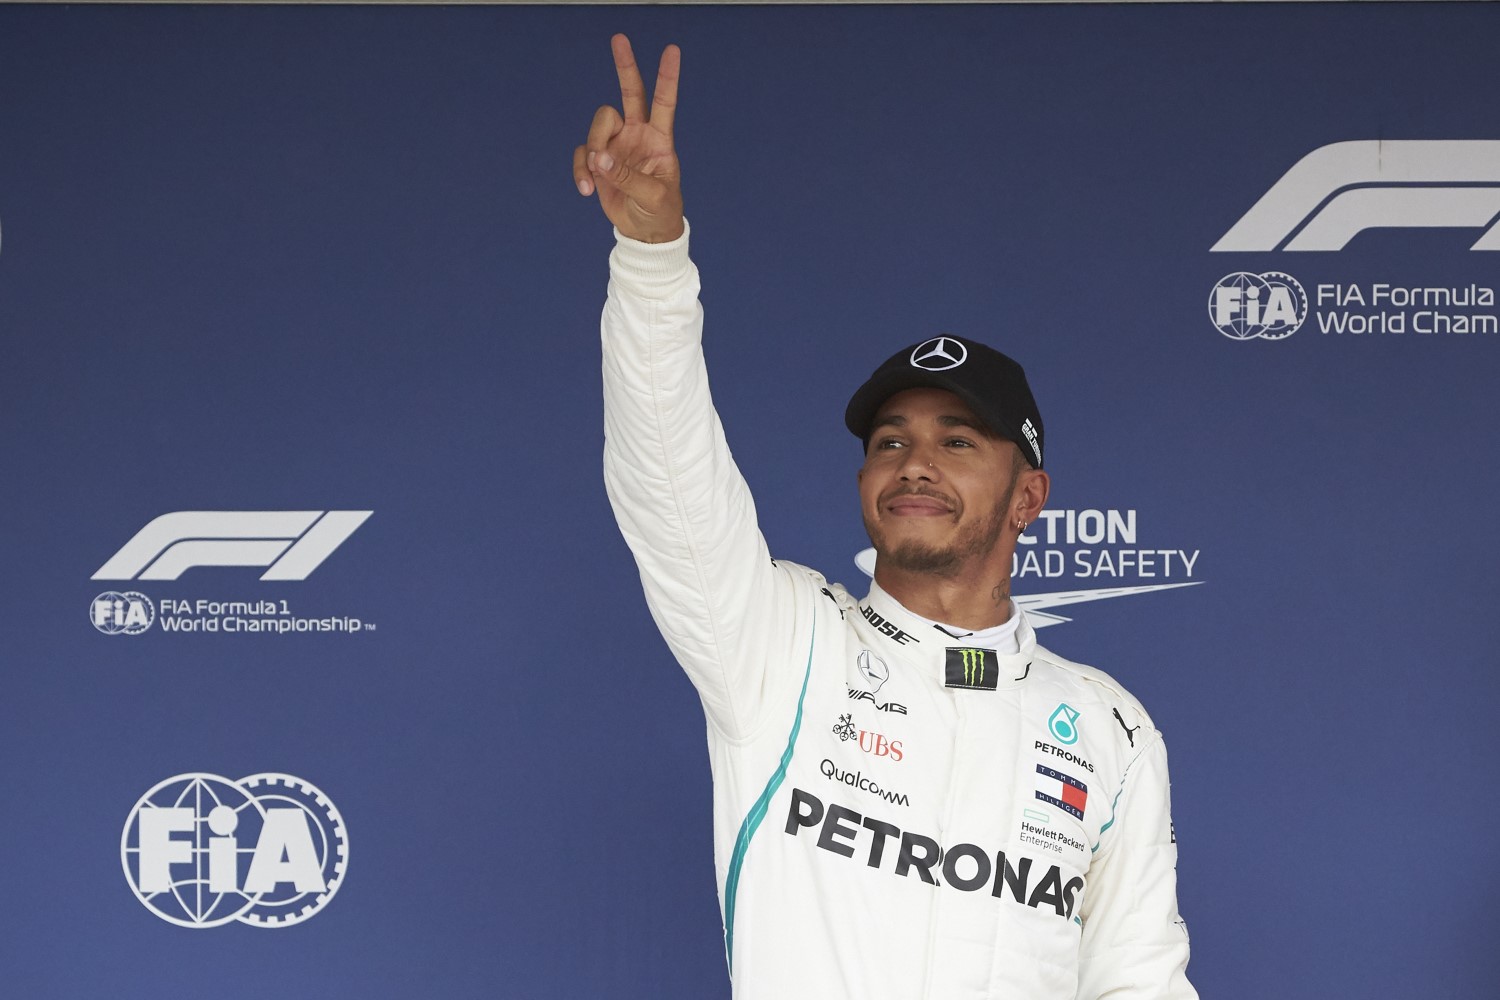 Hamilton will be crowned world champion in Austin in 2 weeks